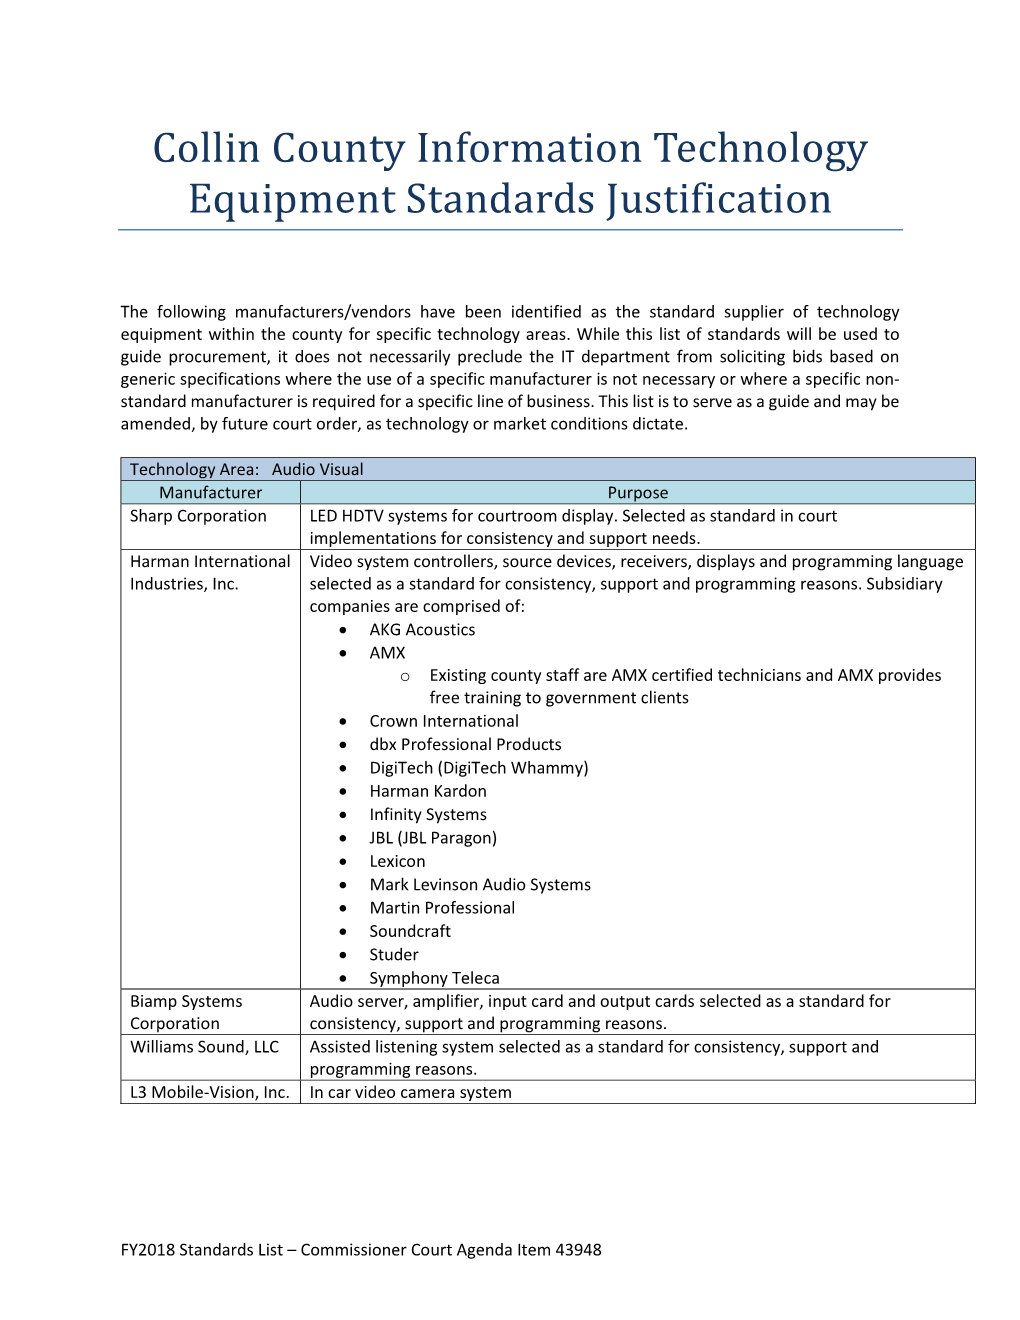 Collin County Information Technology Equipment Standards Justification